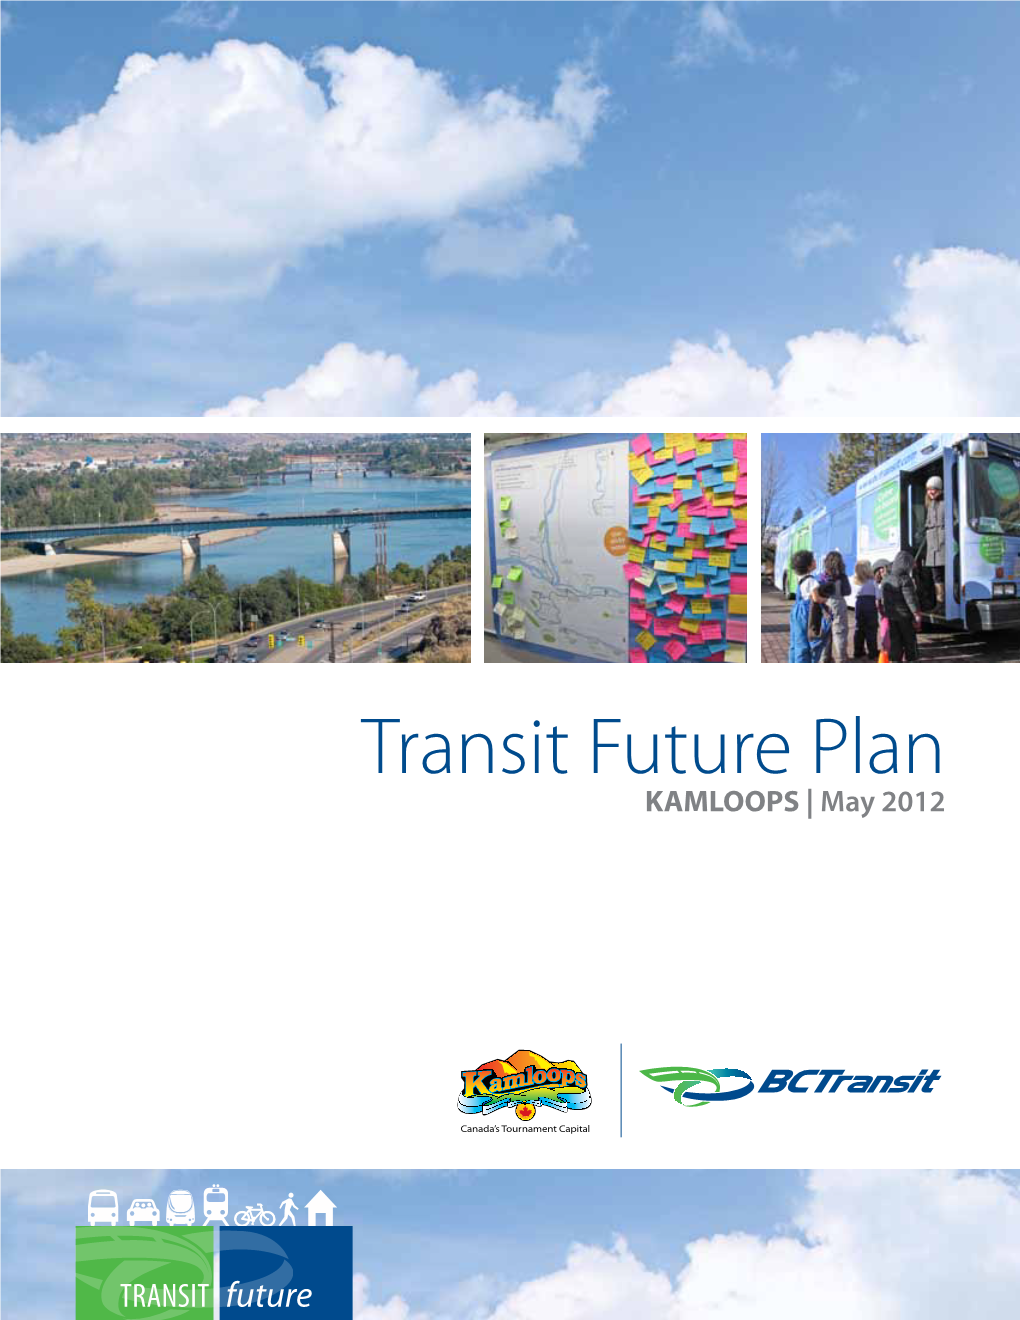 Kamloops Transit Future Plan As the Guiding Document for Transit Investment in Kamloops